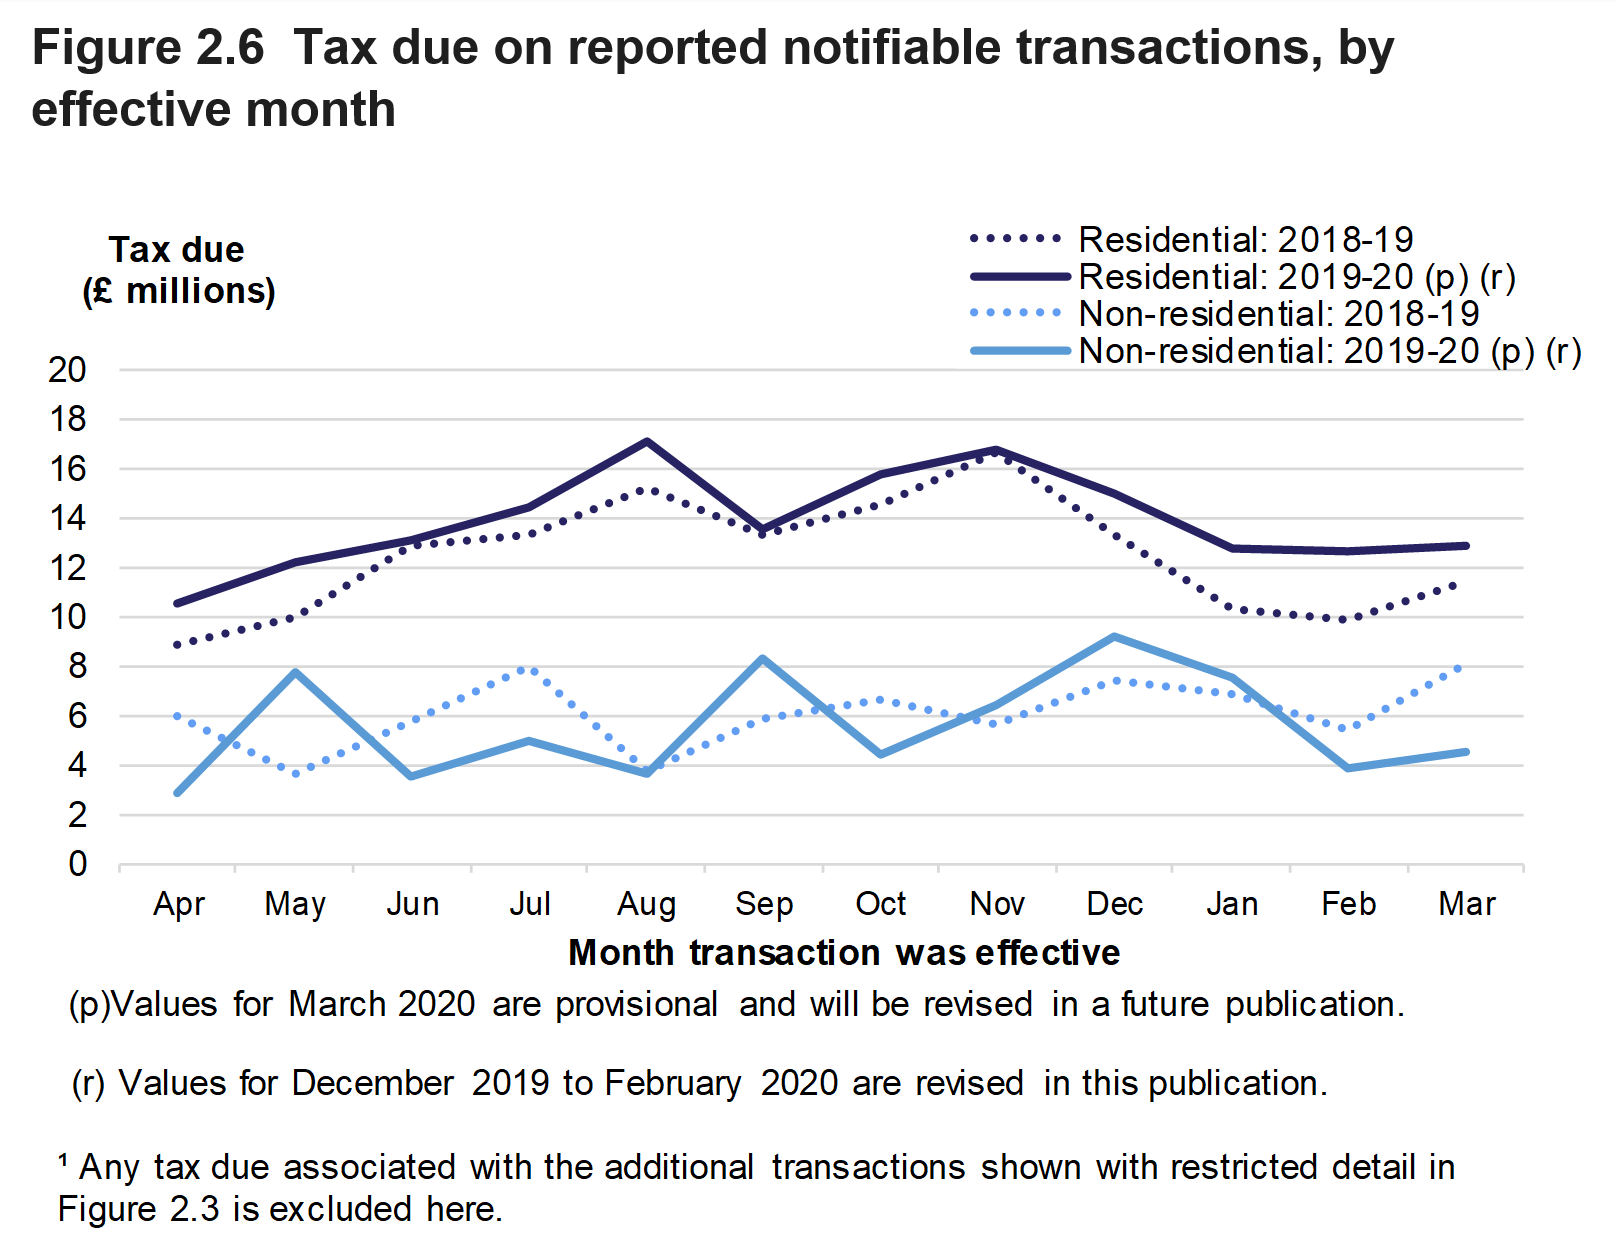 Figure 2.6 shows the monthly amount of tax due on reported notifiable transactions from April 2018 to March 2020, for residential and non-residential transactions.